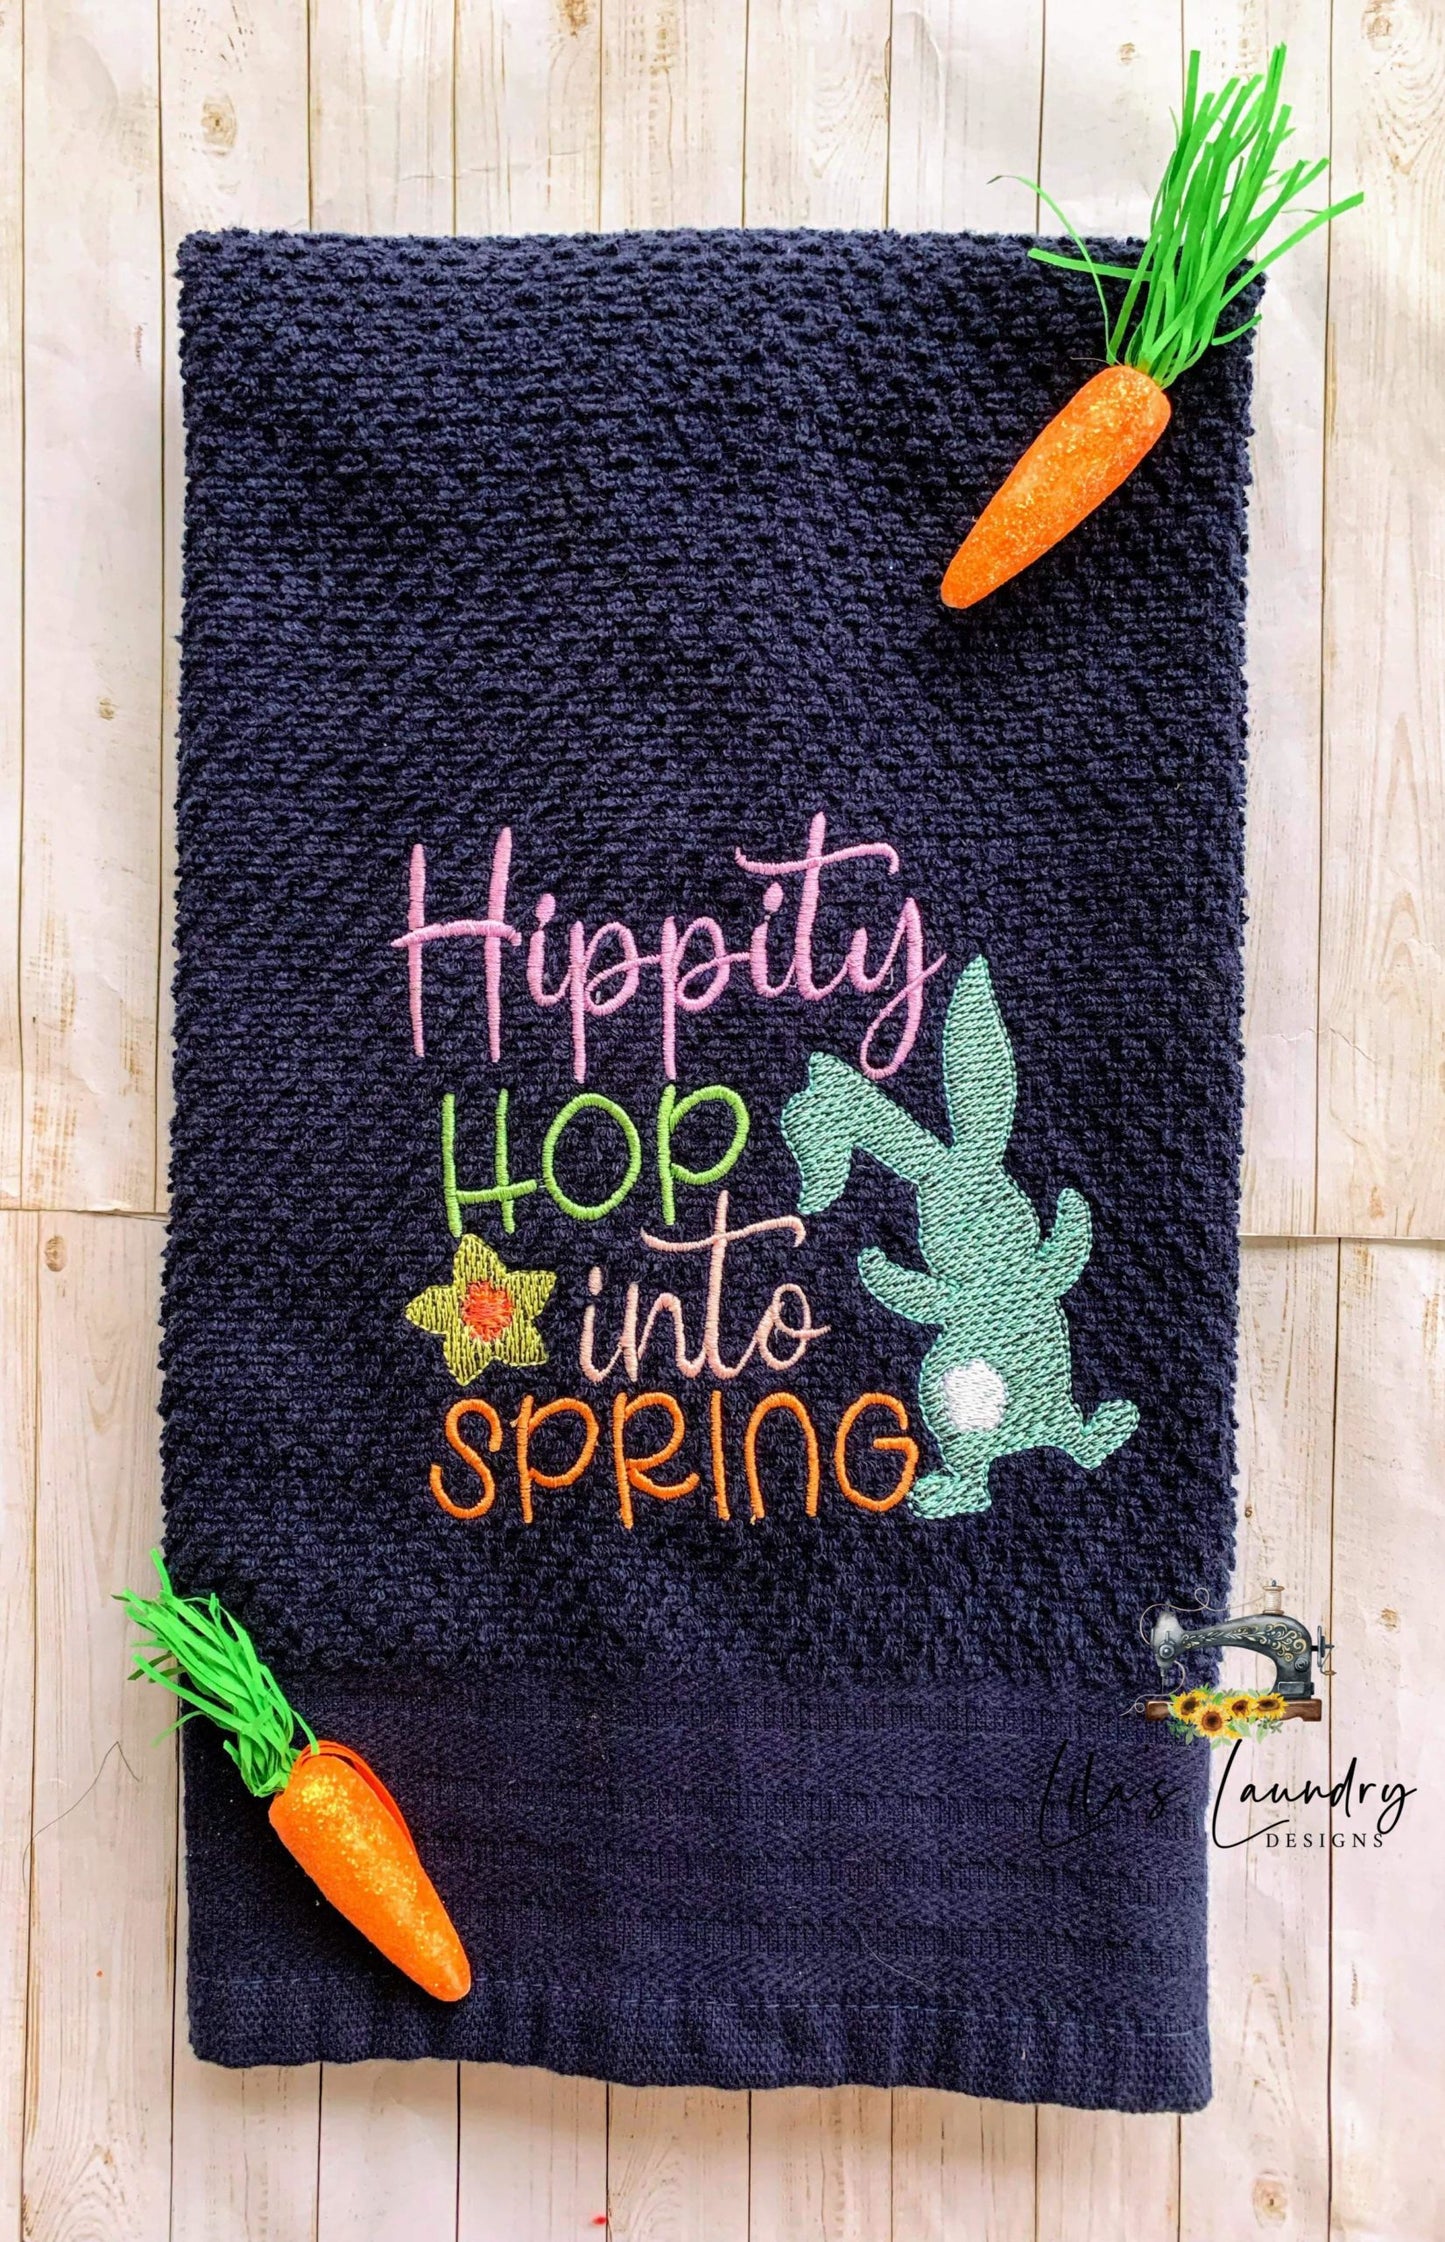 Hippity Hop Into Spring - 3 sizes- Digital Embroidery Design